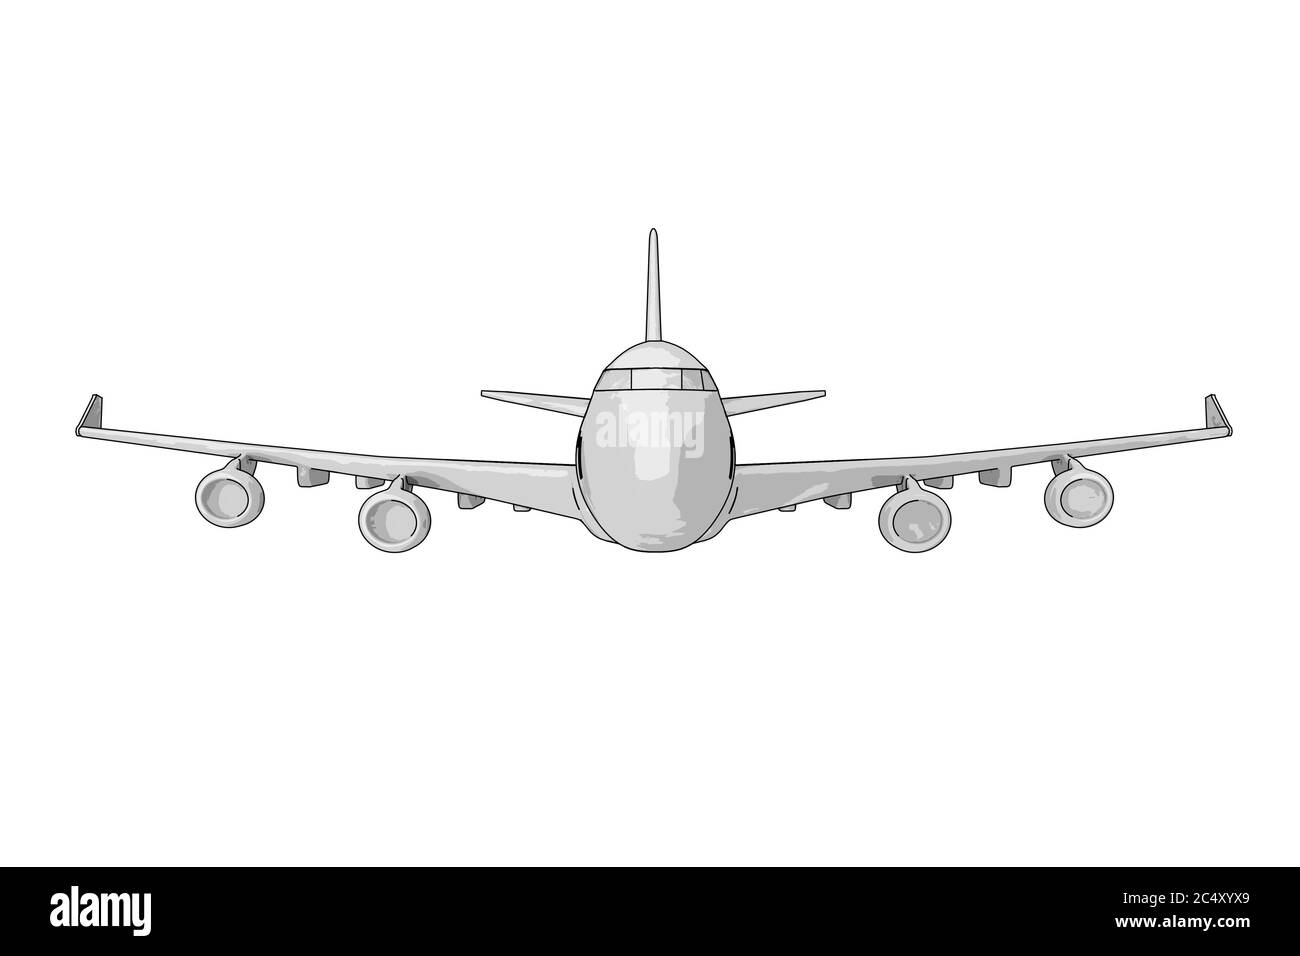 Sketch of Passenger Airplane Pencil Drawing on a white background. 3d Rendering Stock Photo